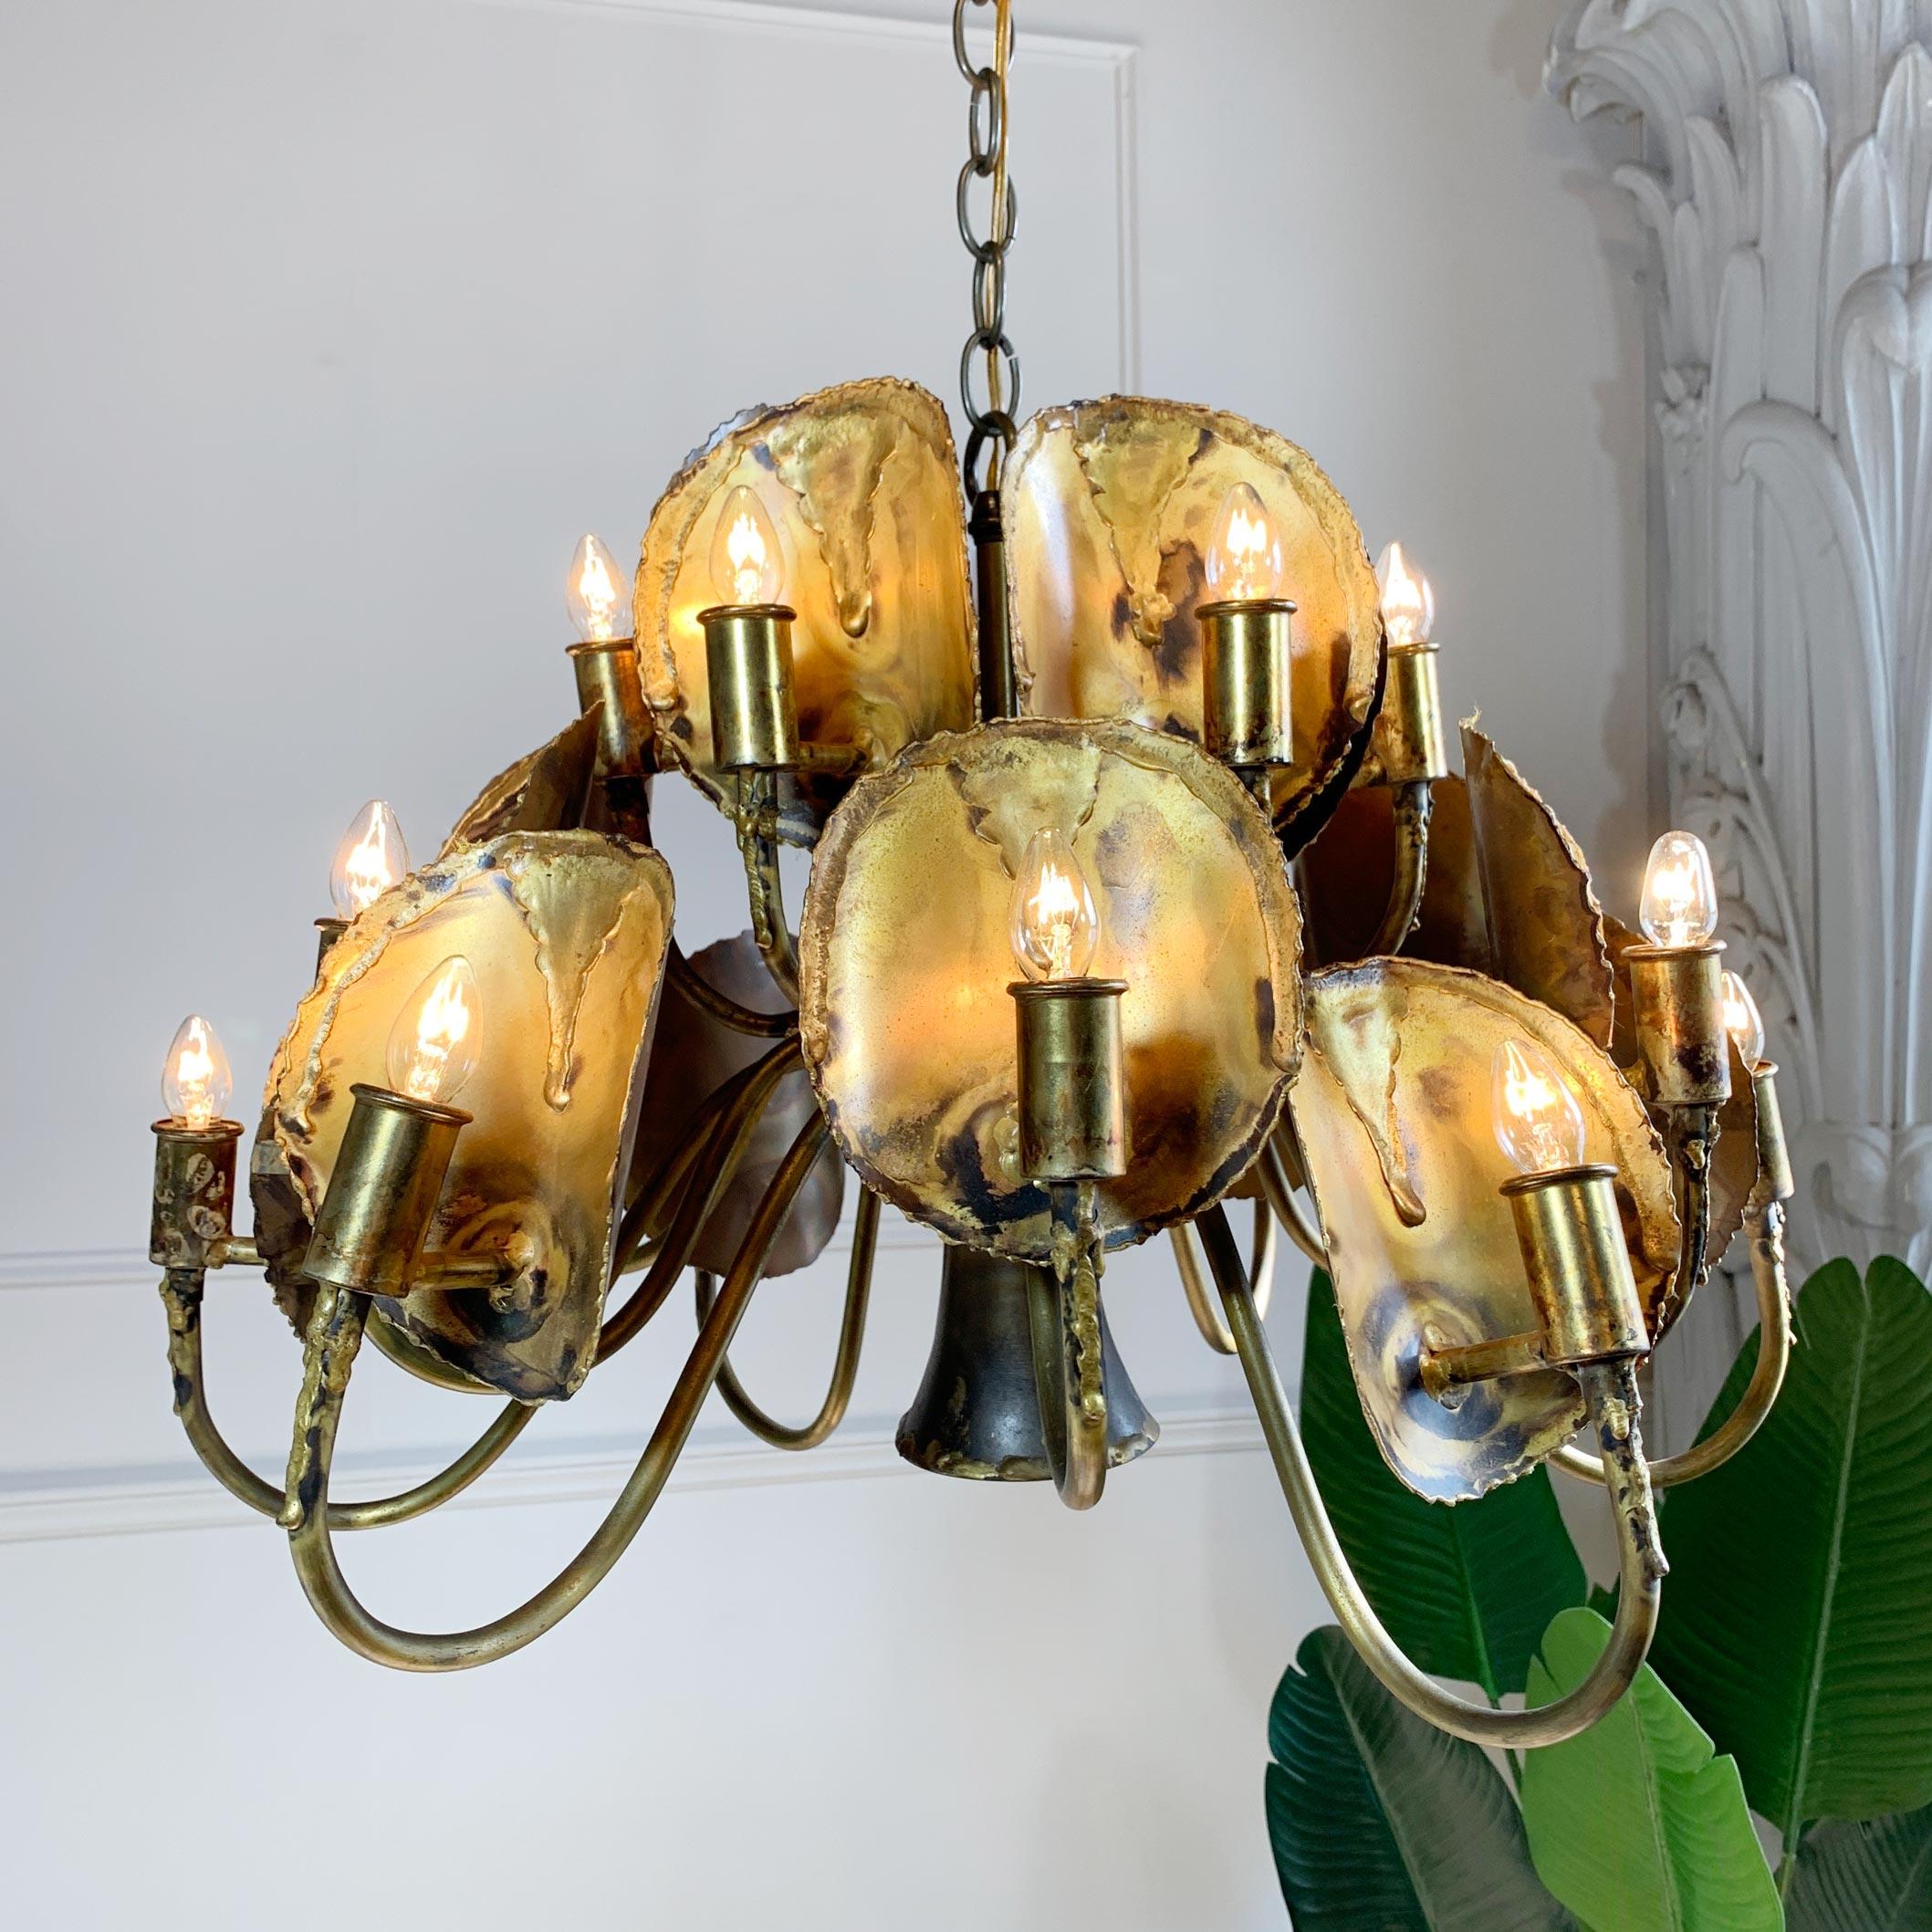 LA based designer and sculptor Tom Greene hand crafted this brutalist chandelier for 'Feldman Lighting Company' in the late 1960s/1970s
The design features staggered tiers of torch cut patinated brass disks, these are arranged cleverly so the light